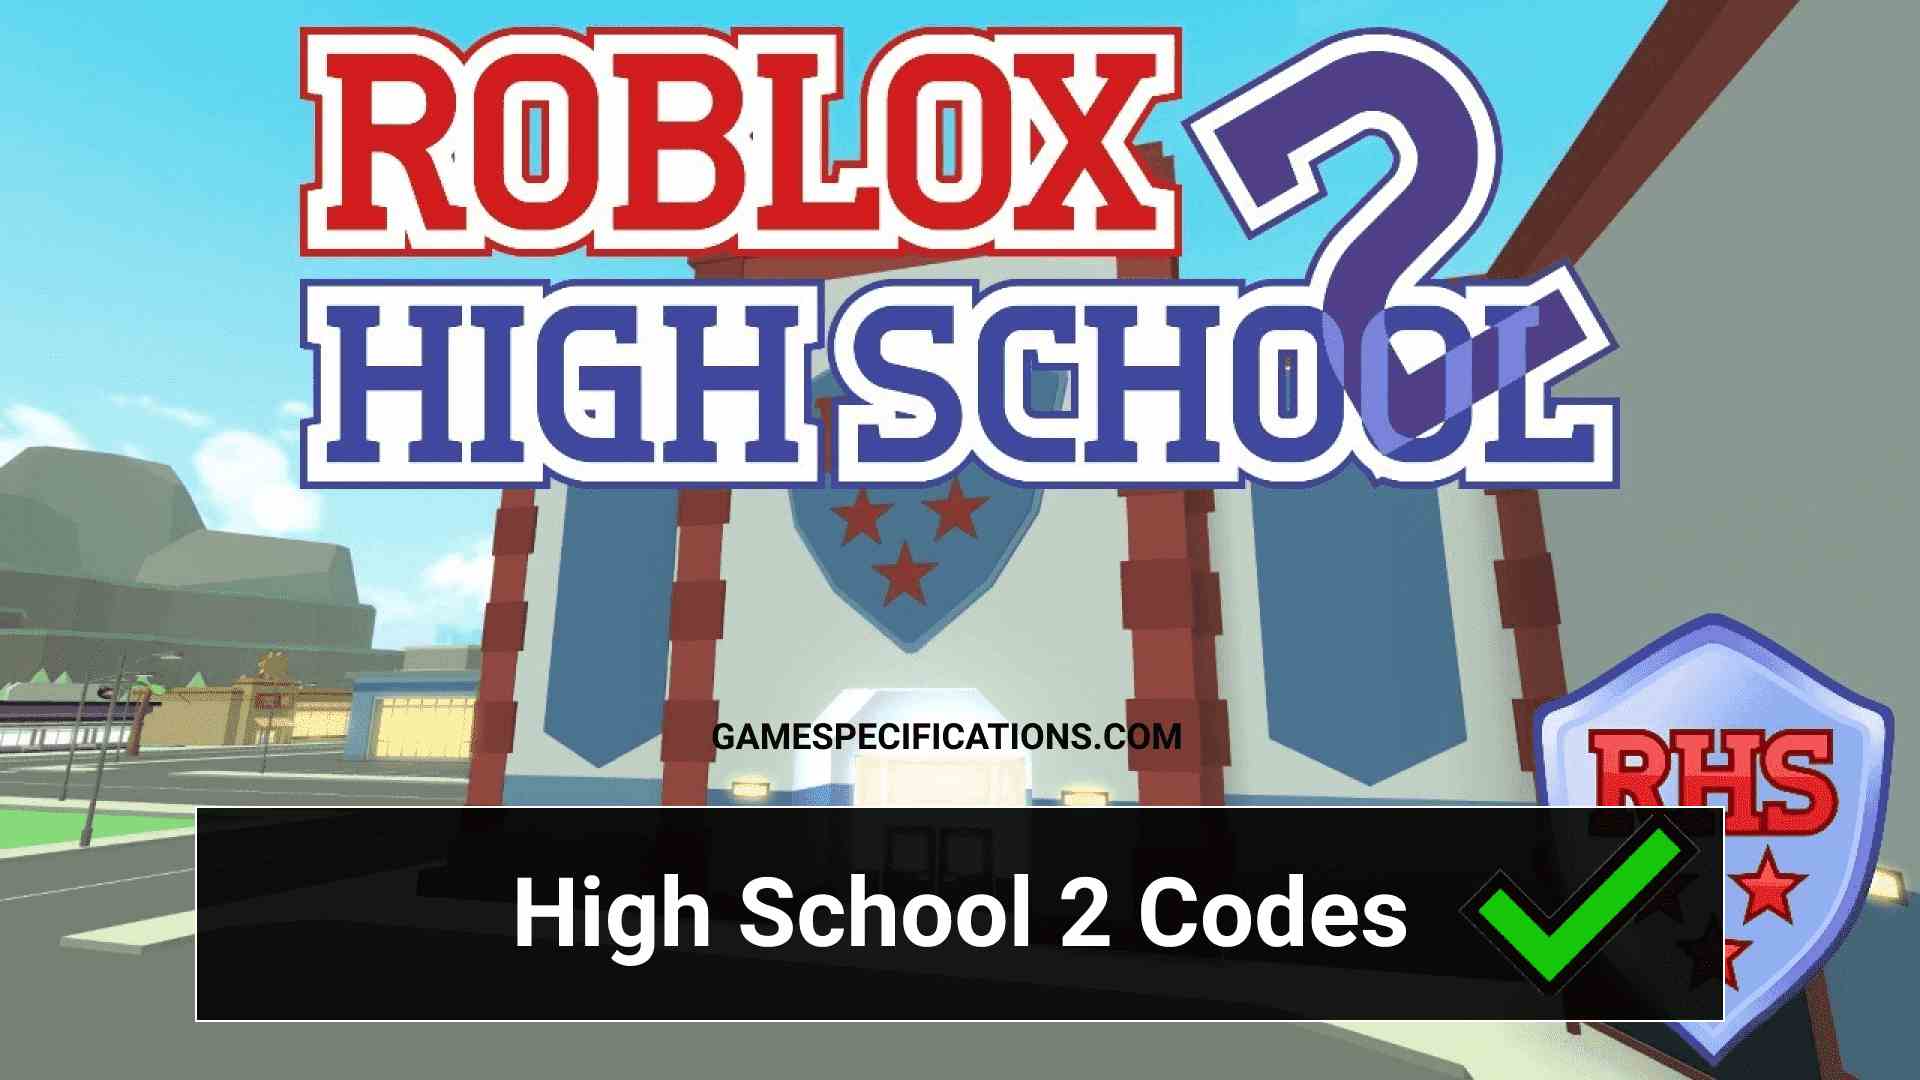 17 Working Roblox High School 2 Codes July 2021 Game Specifications - codes for game dev life roblox